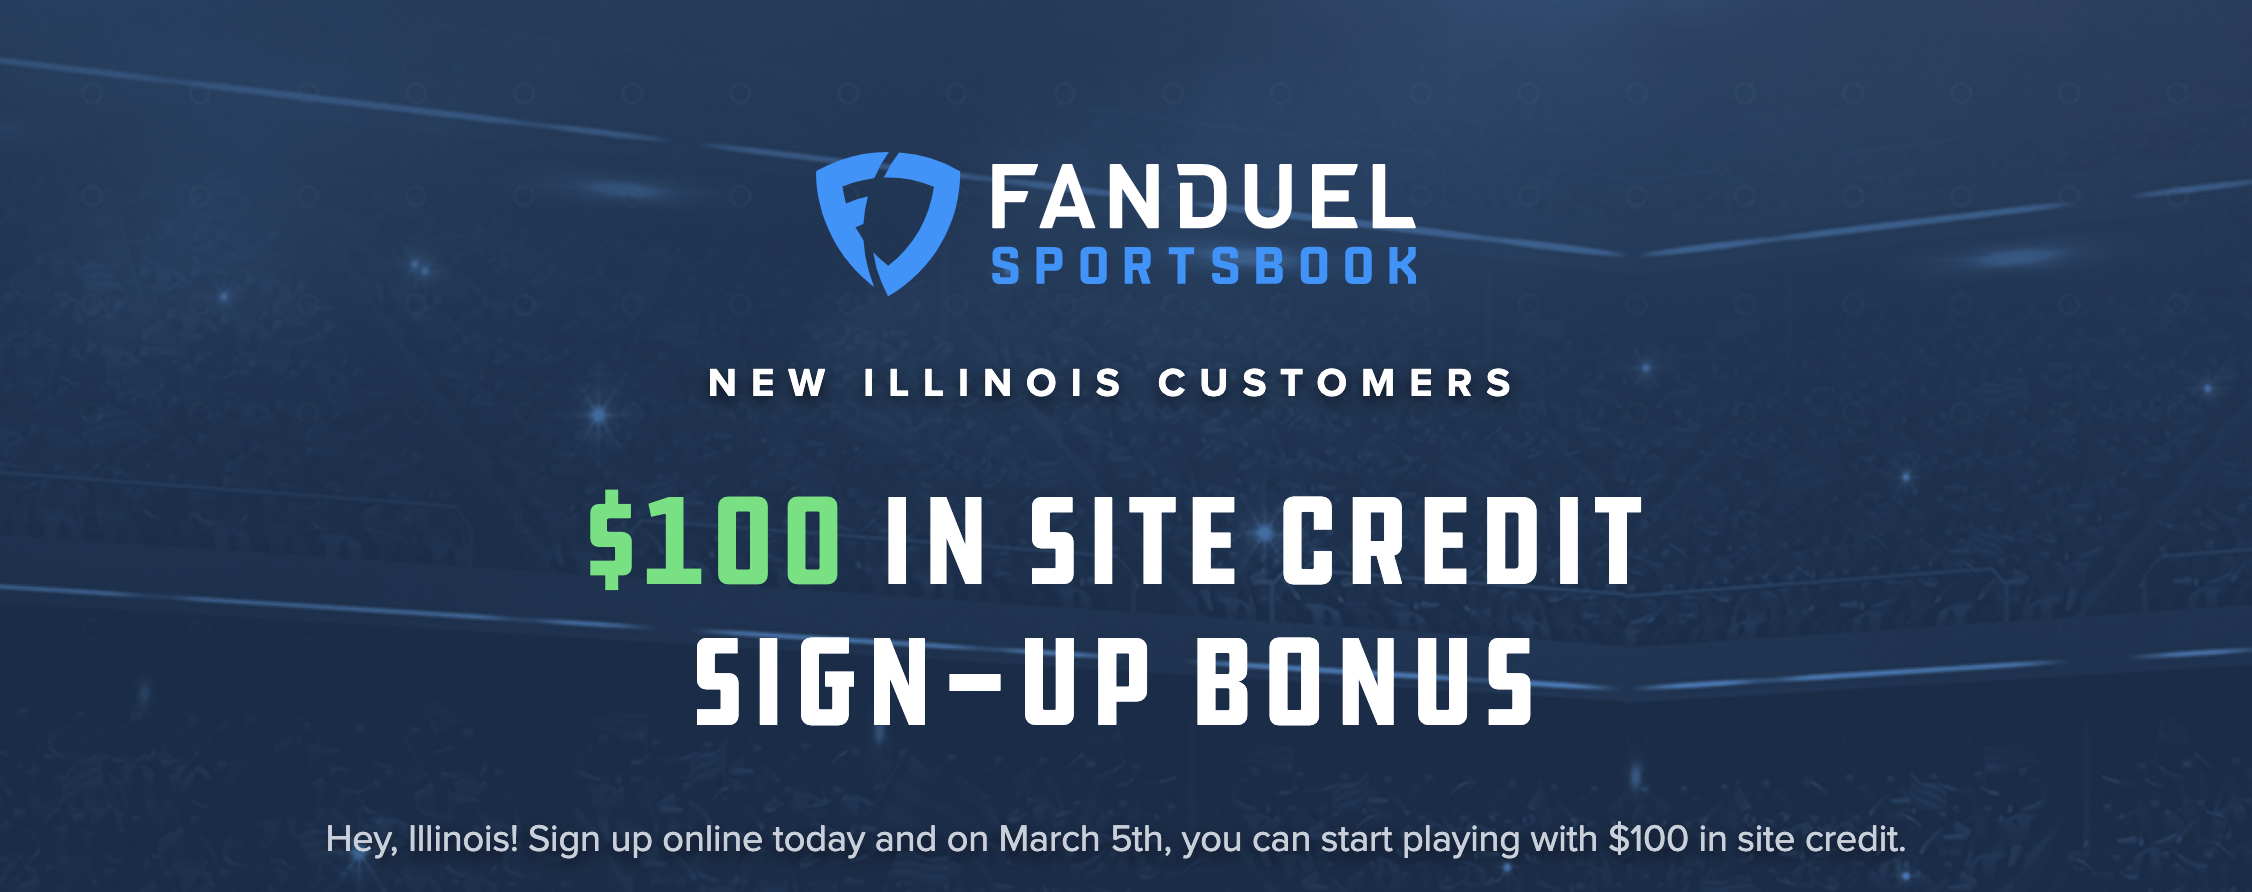 FanDuel Sportsbook Offering Free $100 Pre-Launch Bonus For Illinois Users Ahead of March 5 Debut